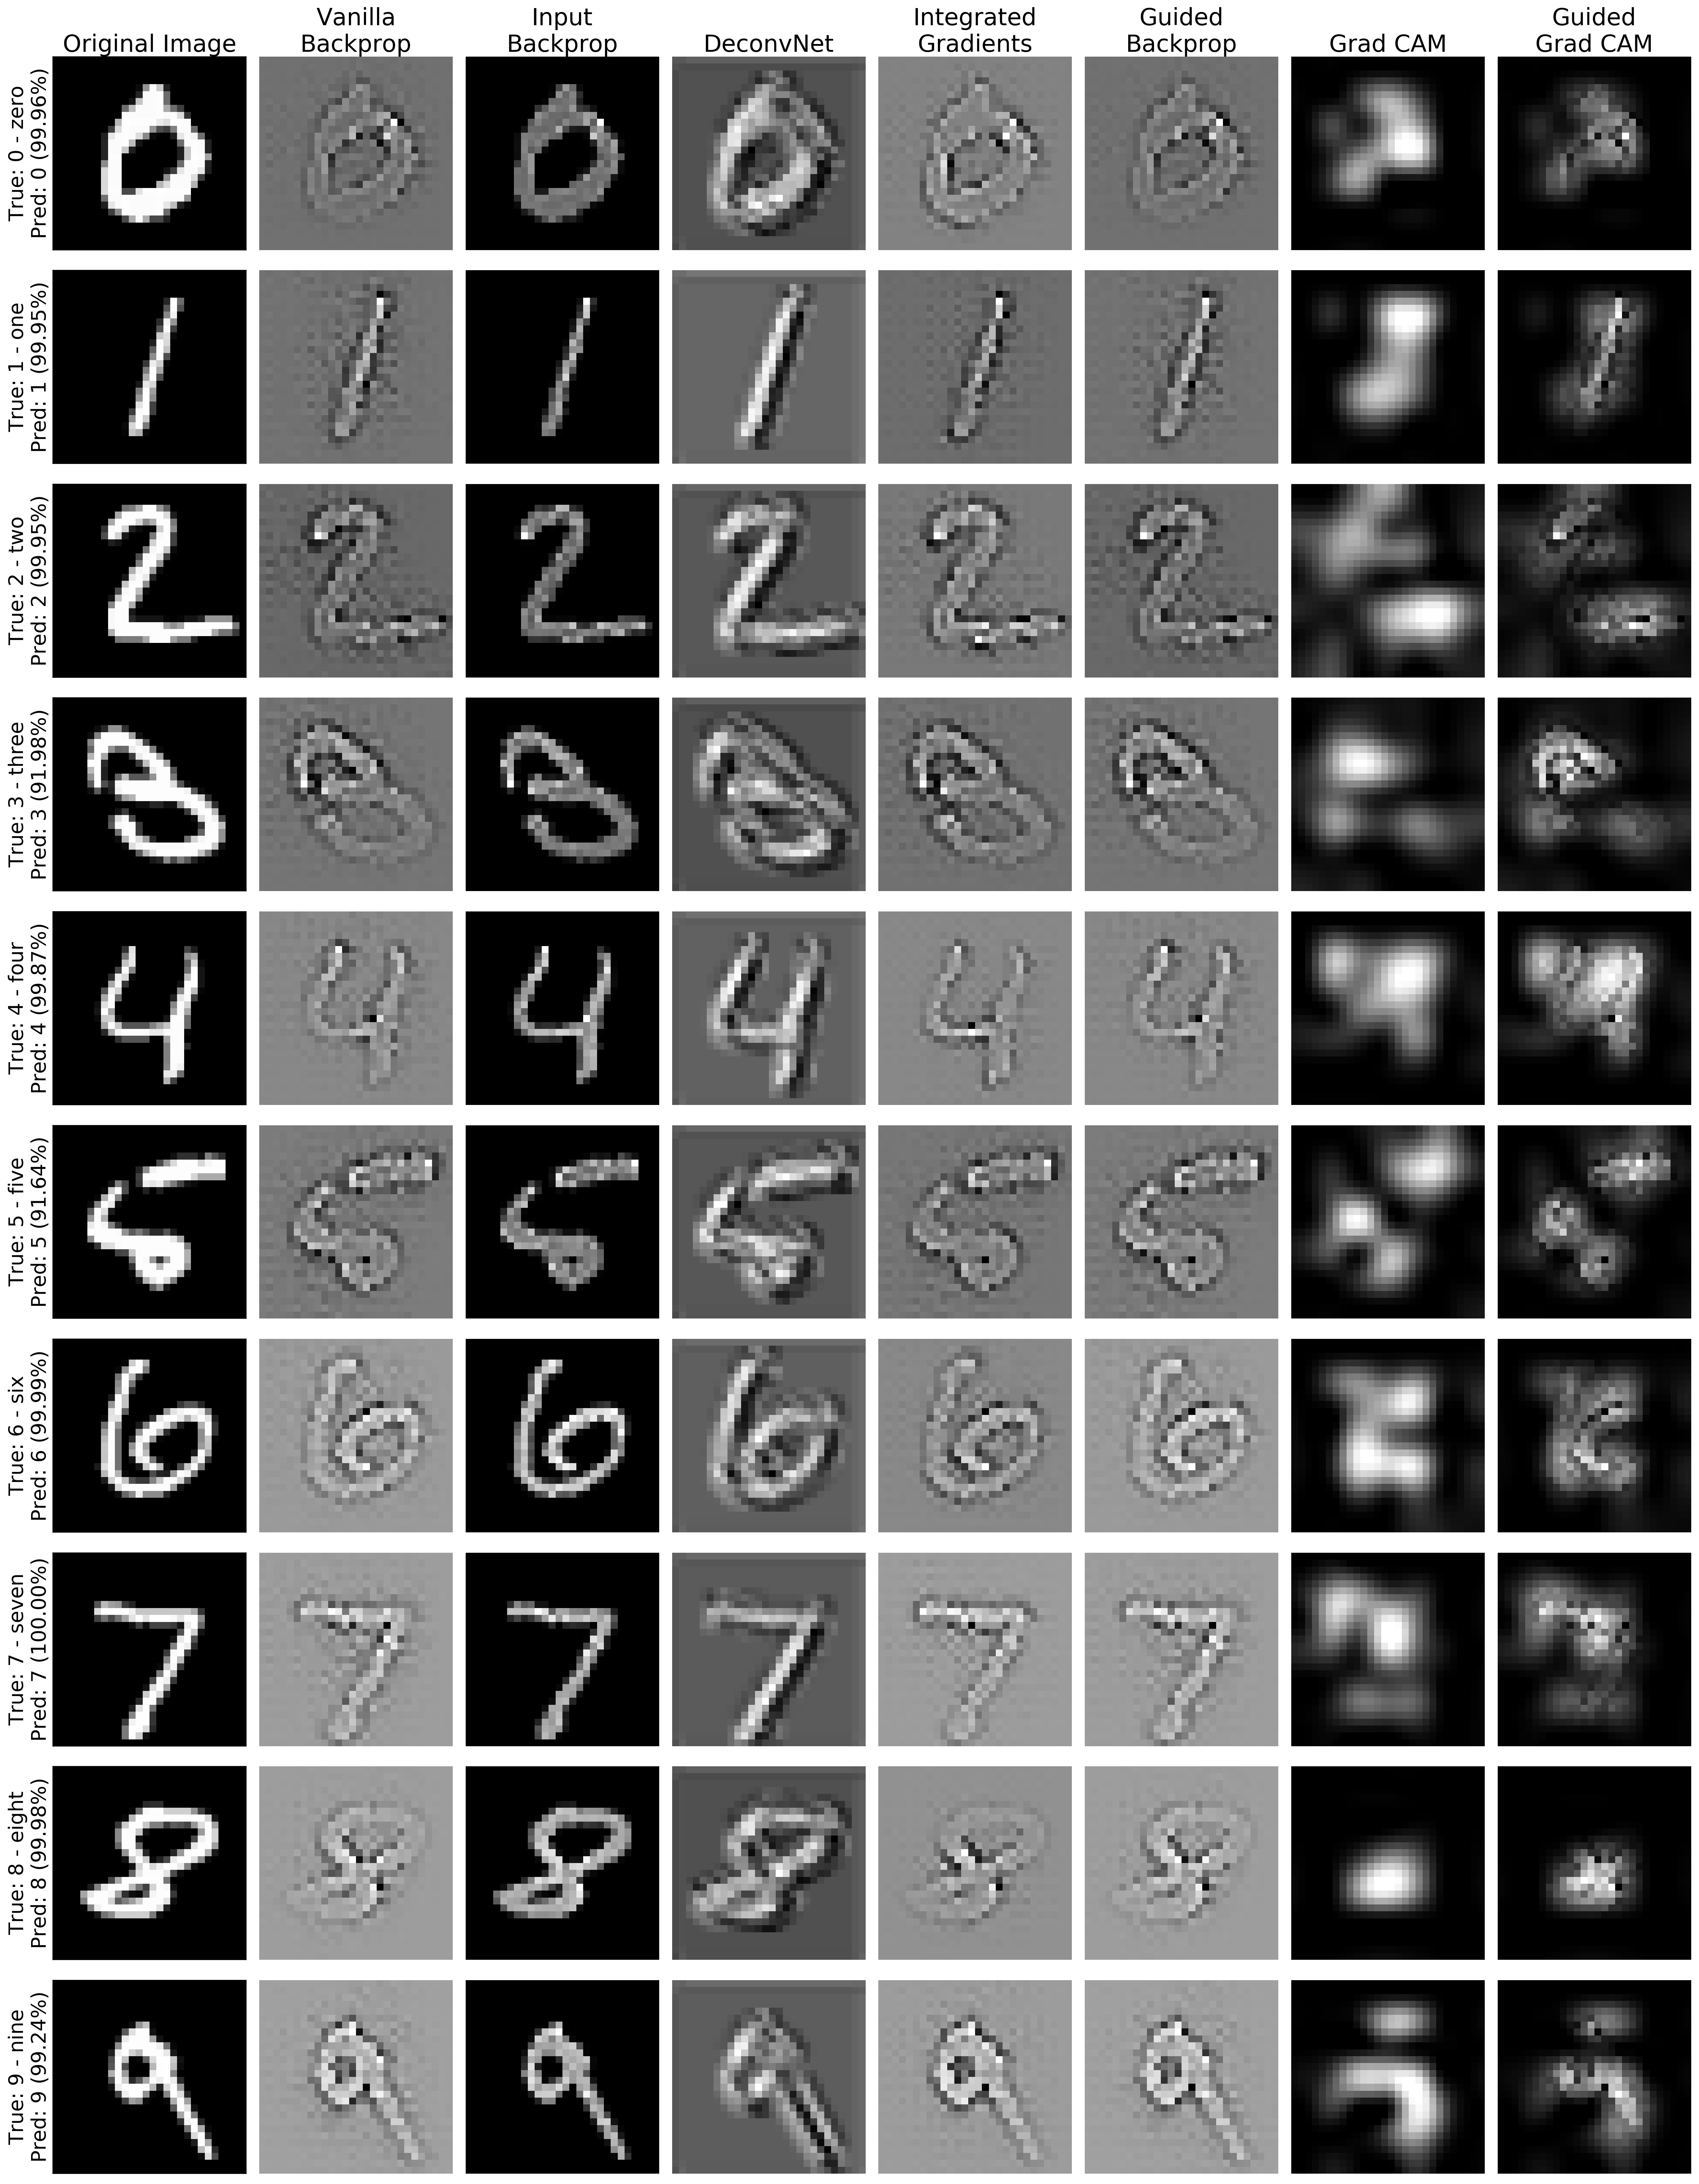 mnist_coherence